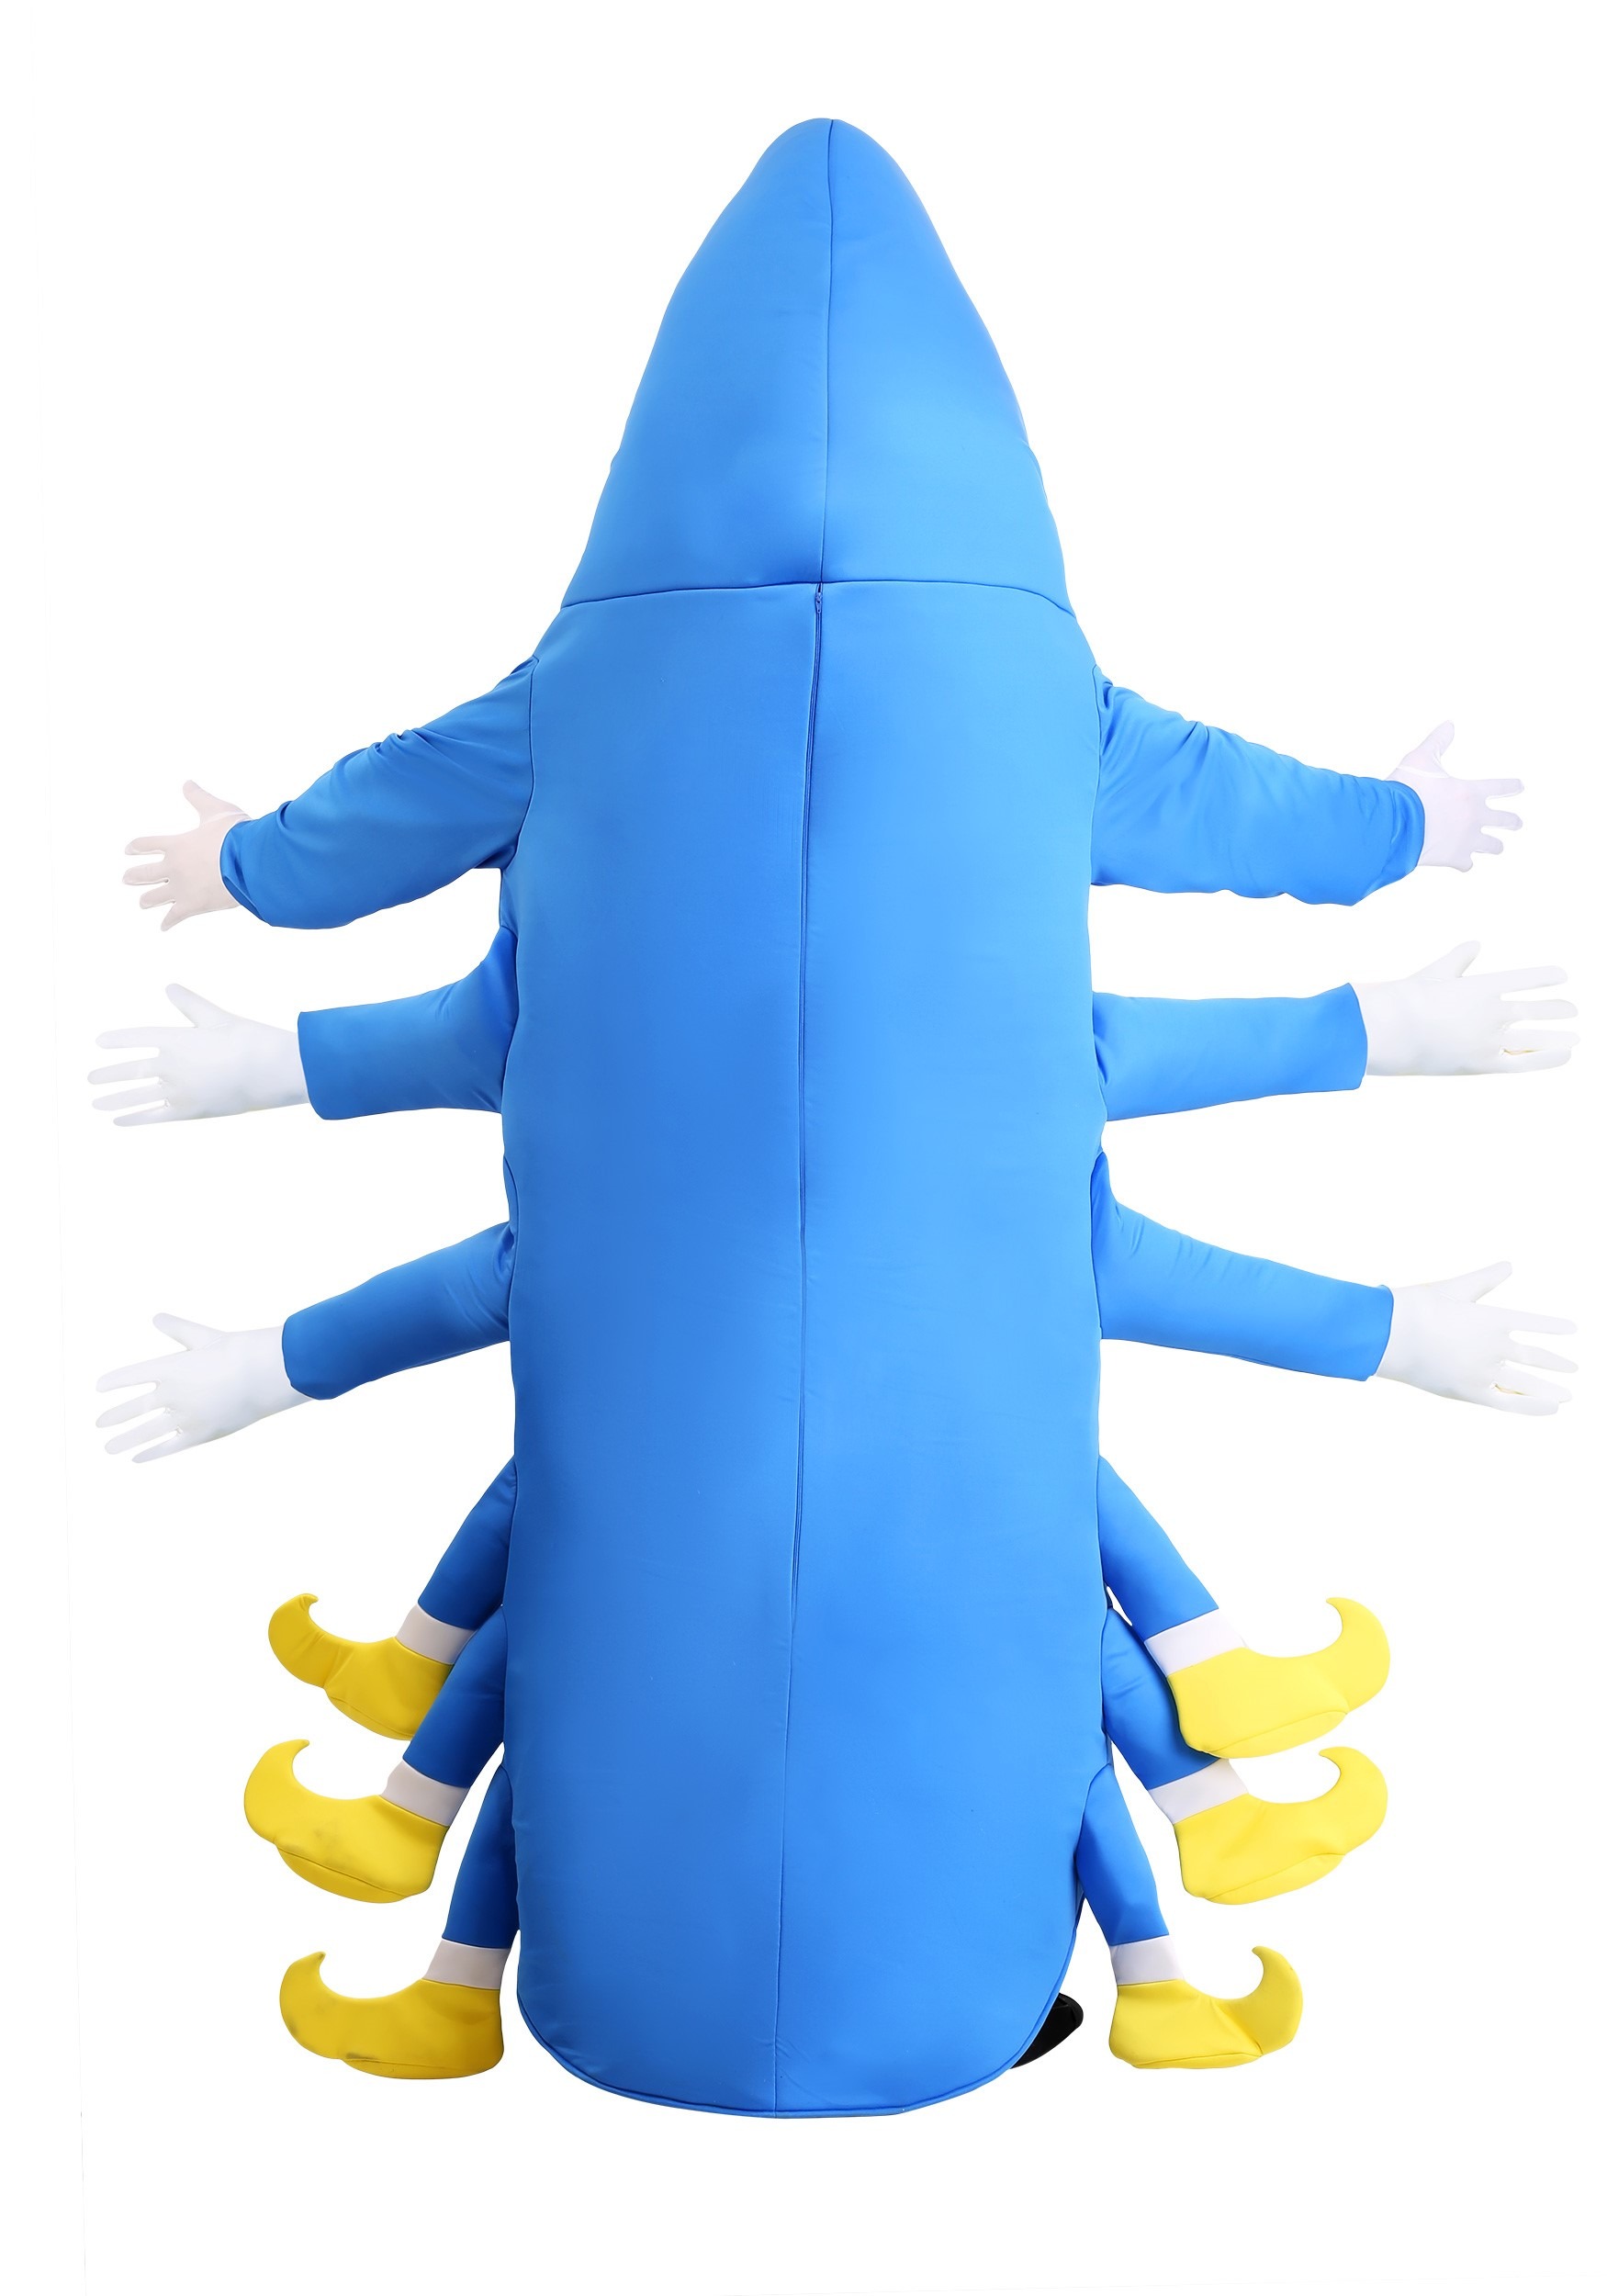 Plus Size Caterpillar Costume For Adults